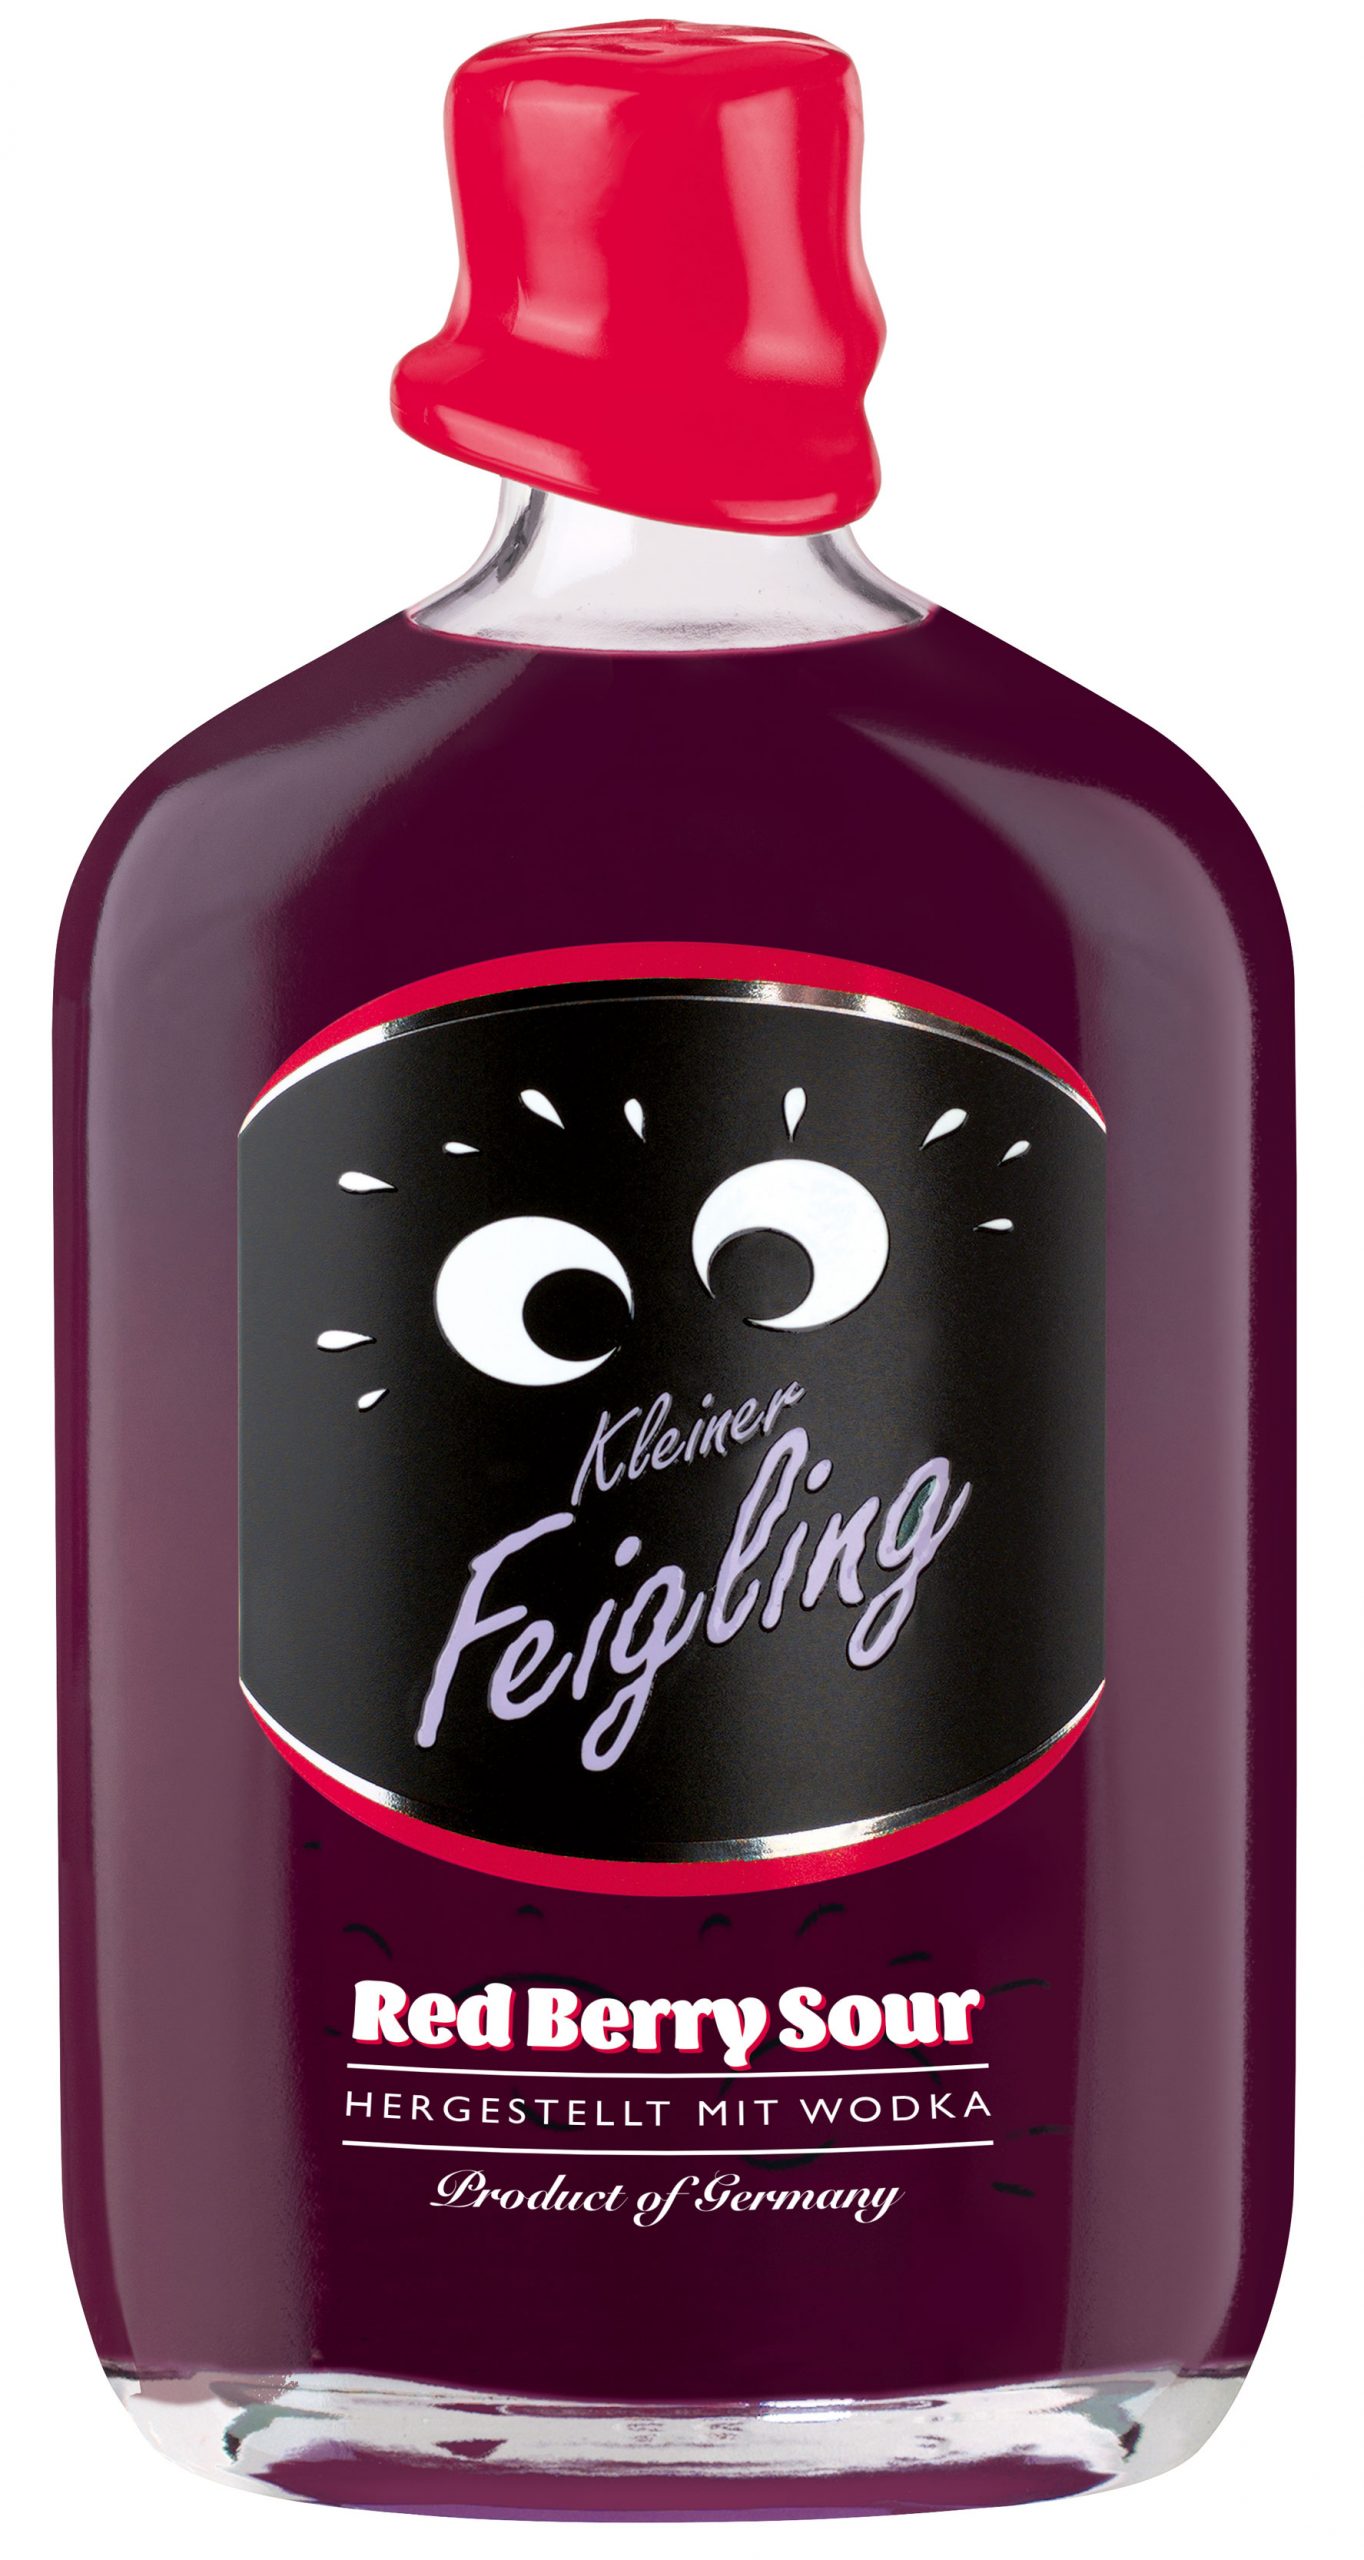 Kleiner Feigling - Red Berry Sour 0,5l 15%vol.